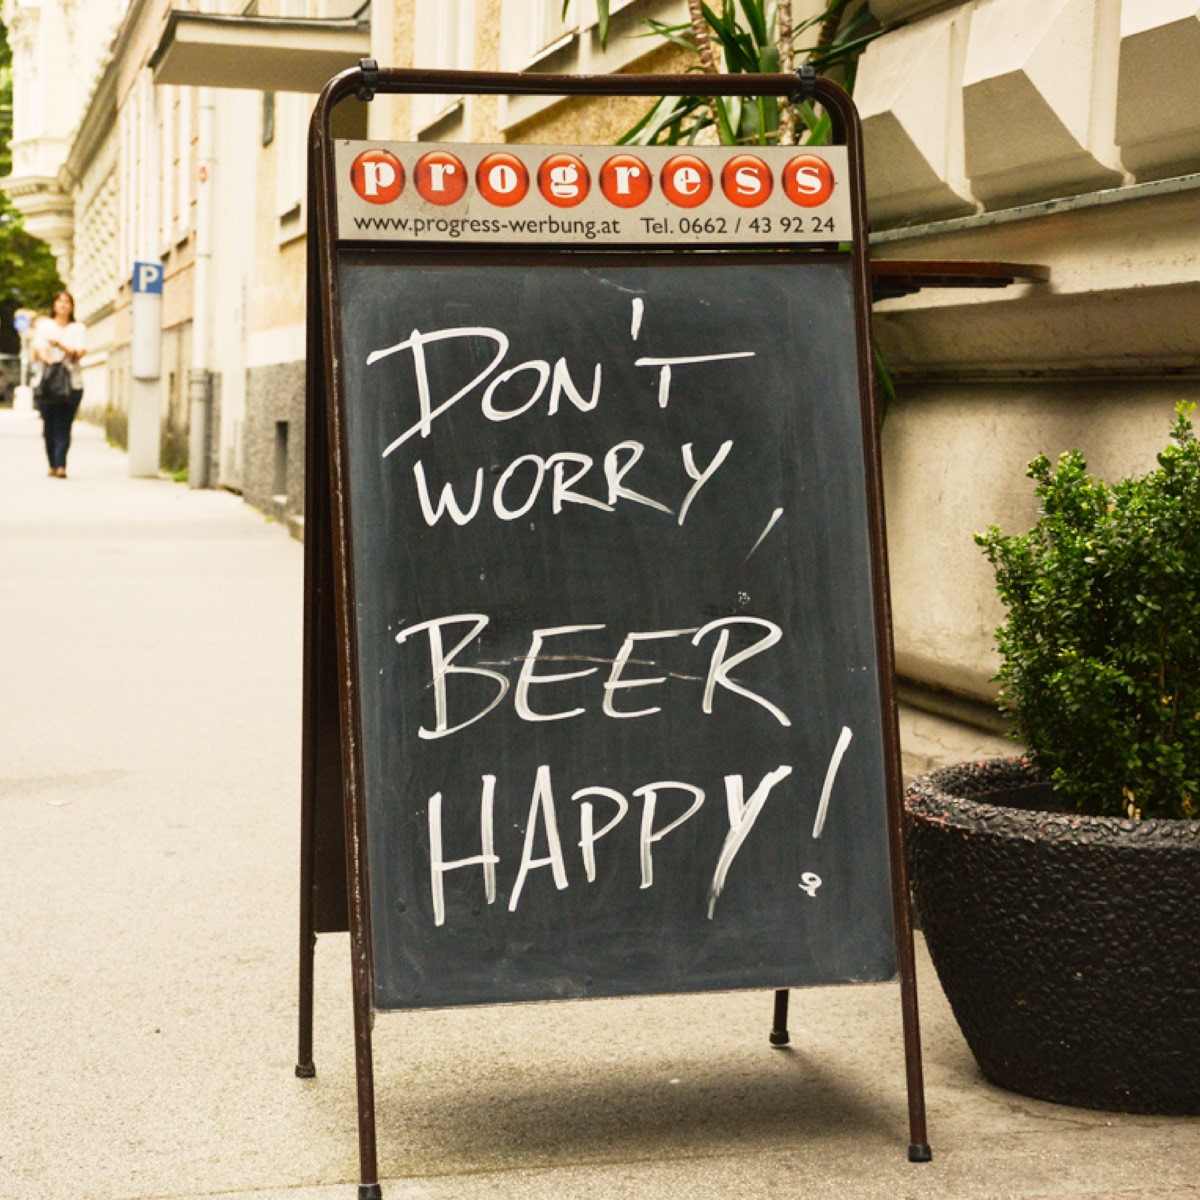 Don't Worry, Beer Happy!